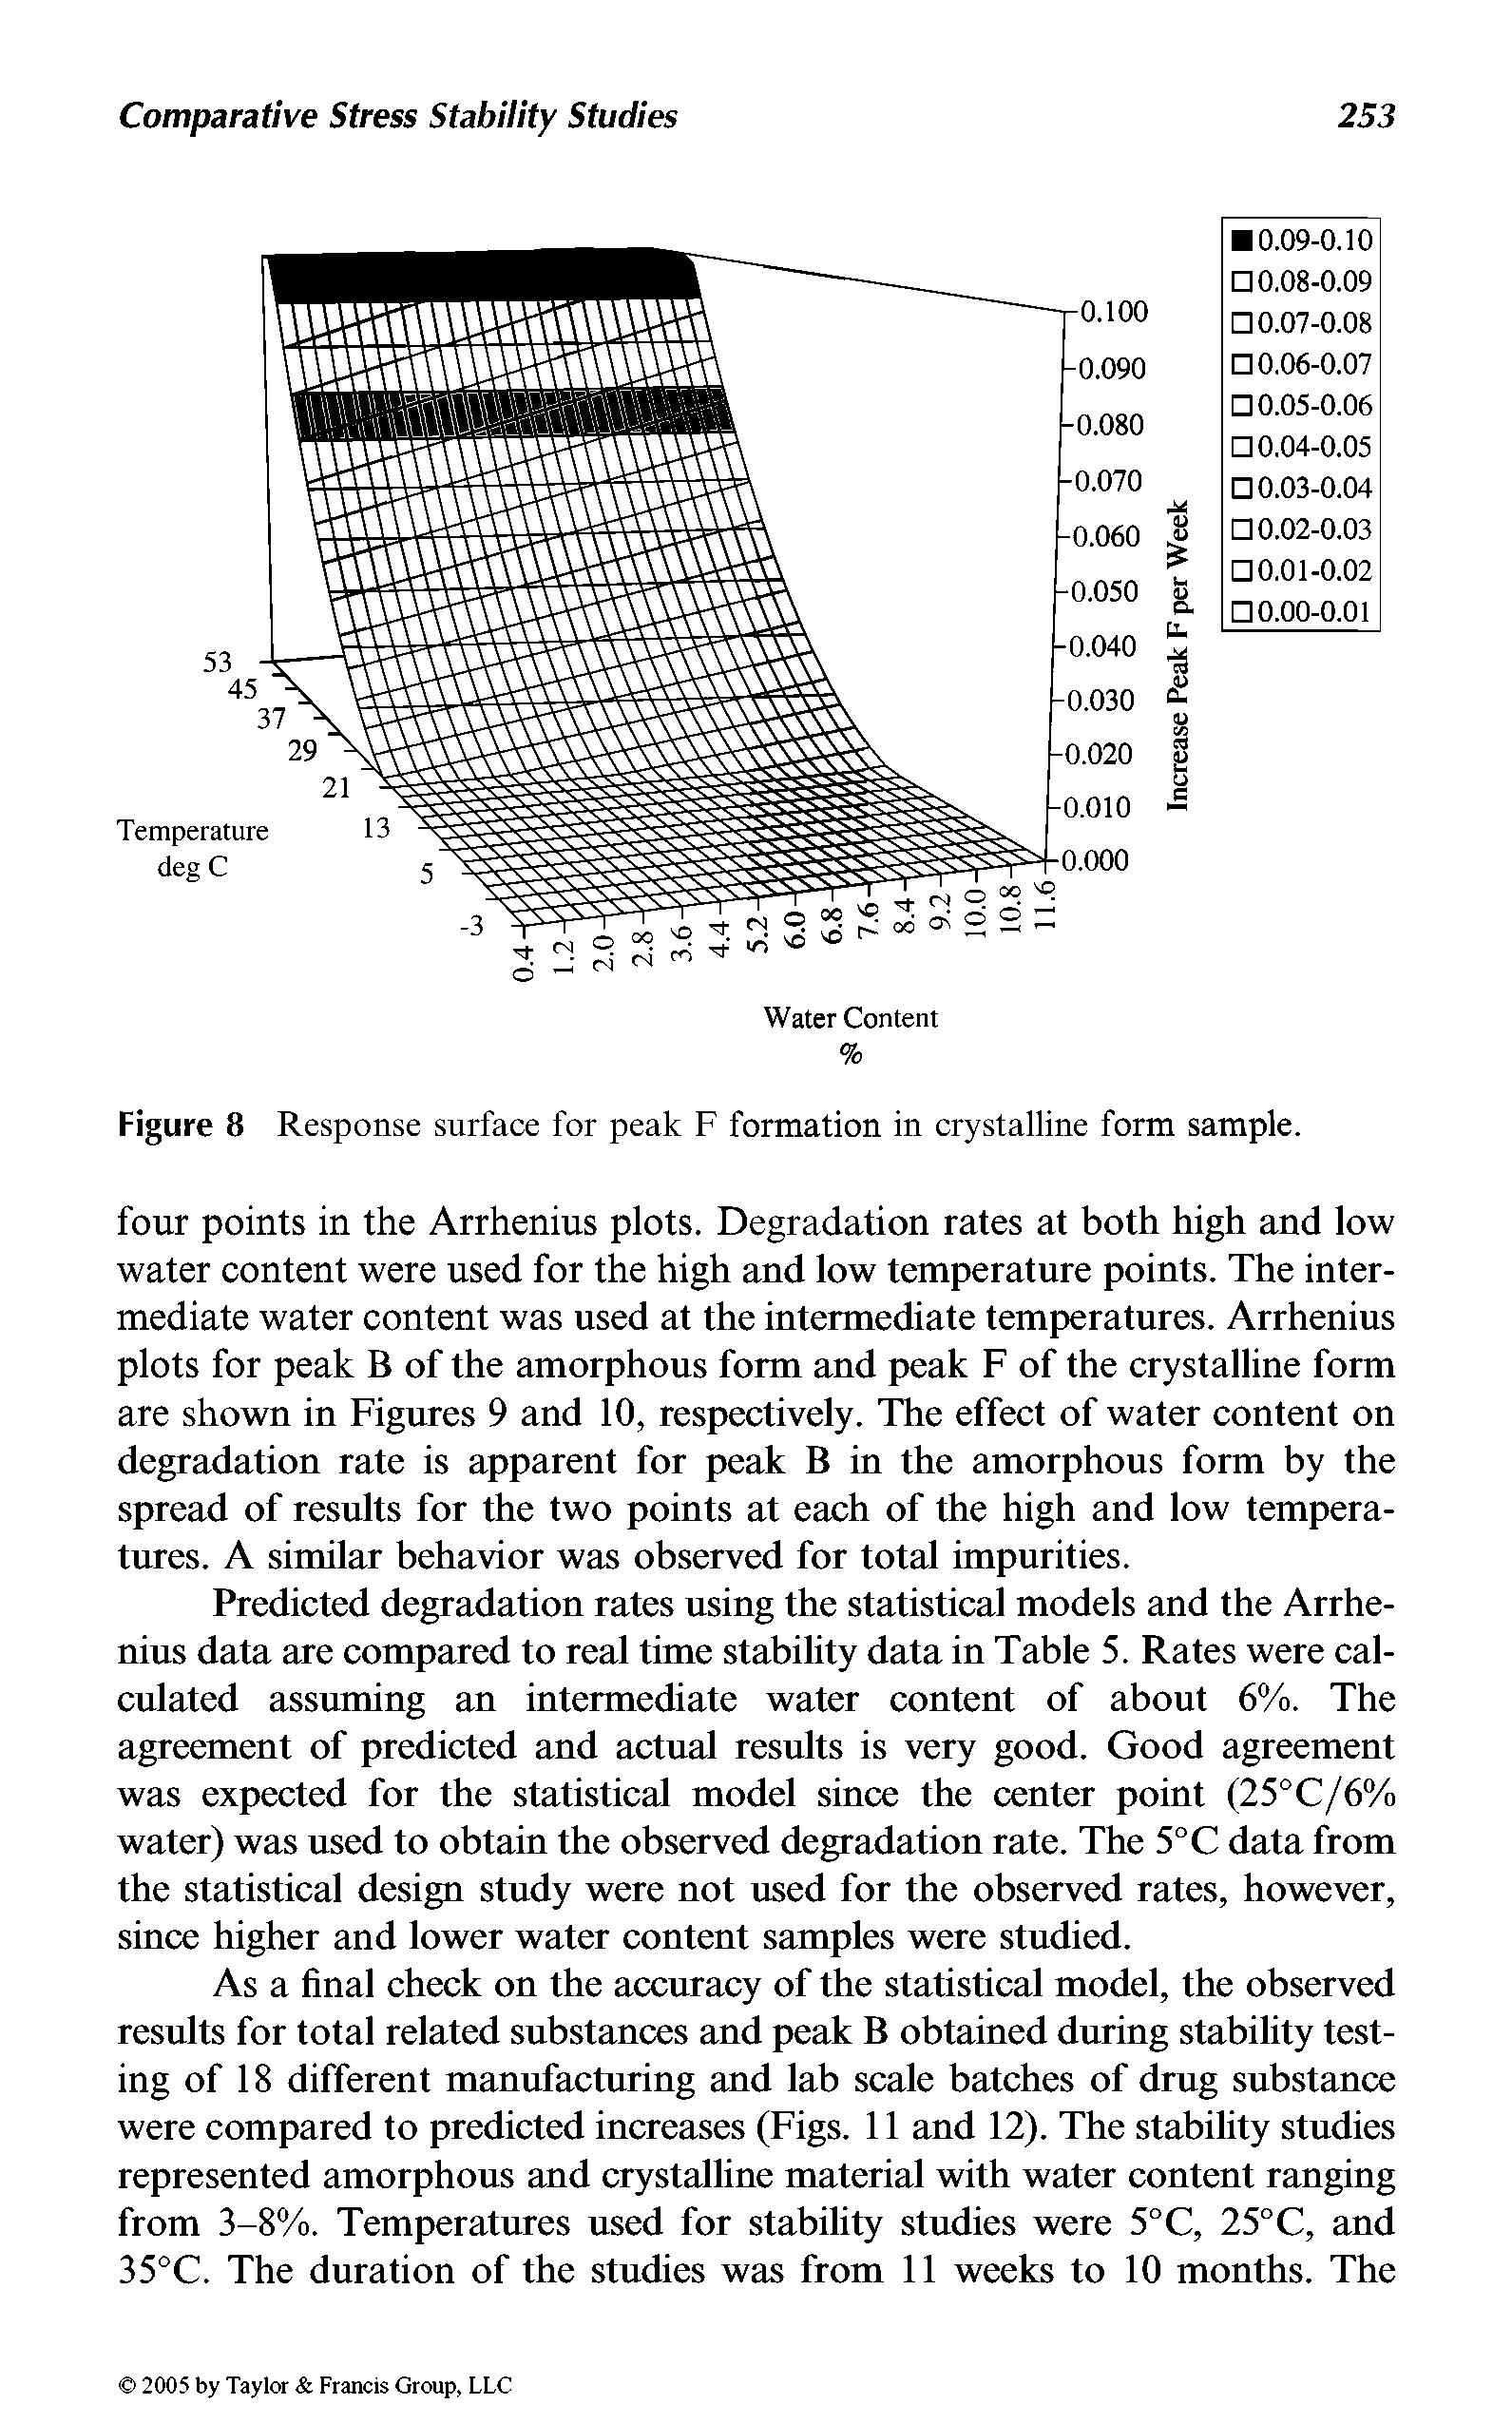 Figure 8 Response surface for peak F formation in crystalline form sample.